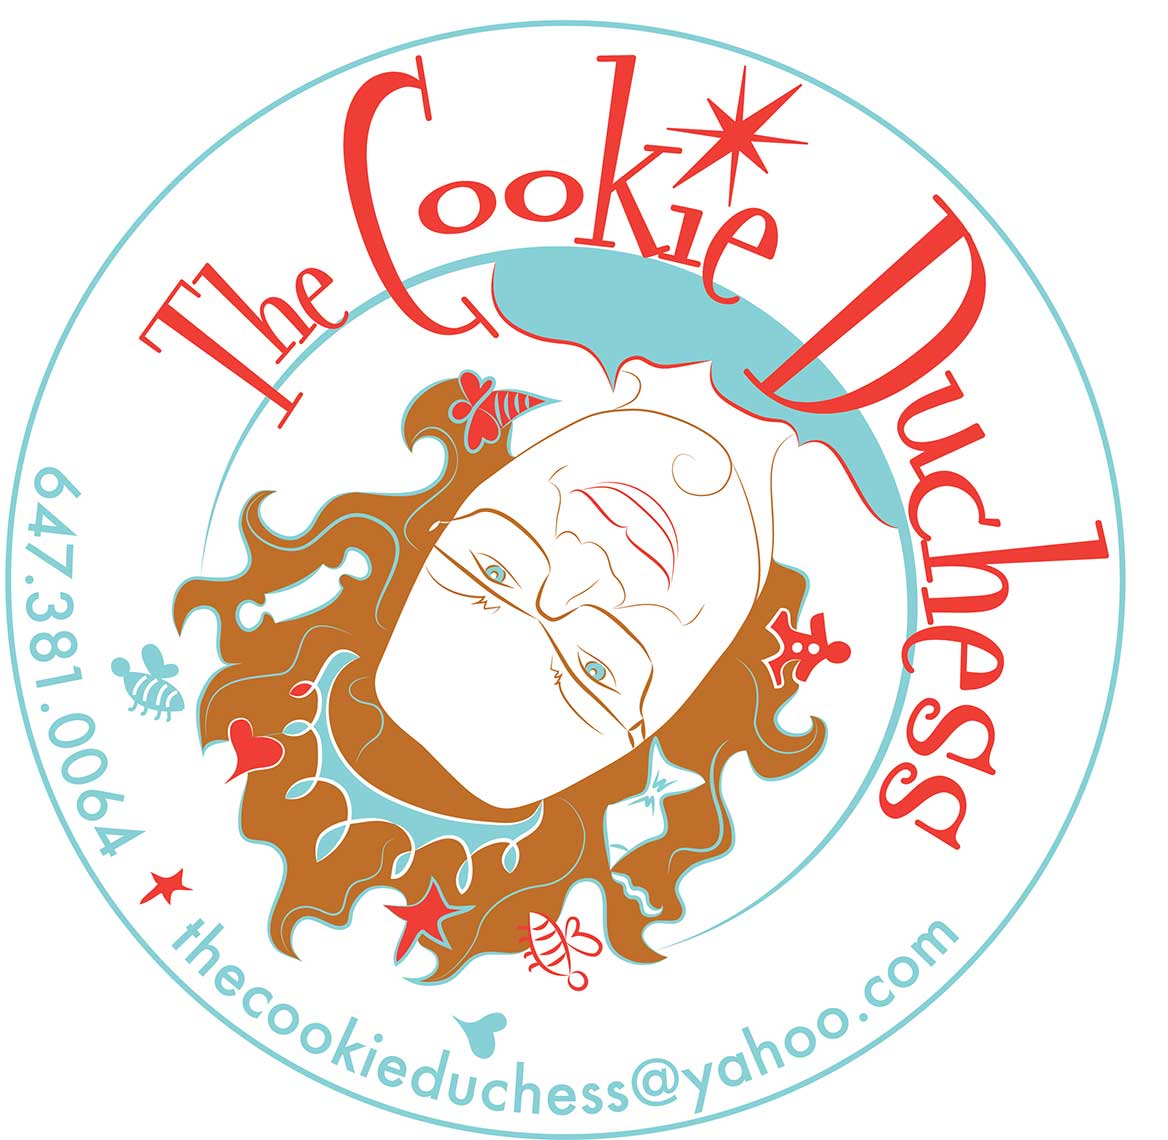 Logo for The Cookie Duchess, creative, fun and tasty cookies